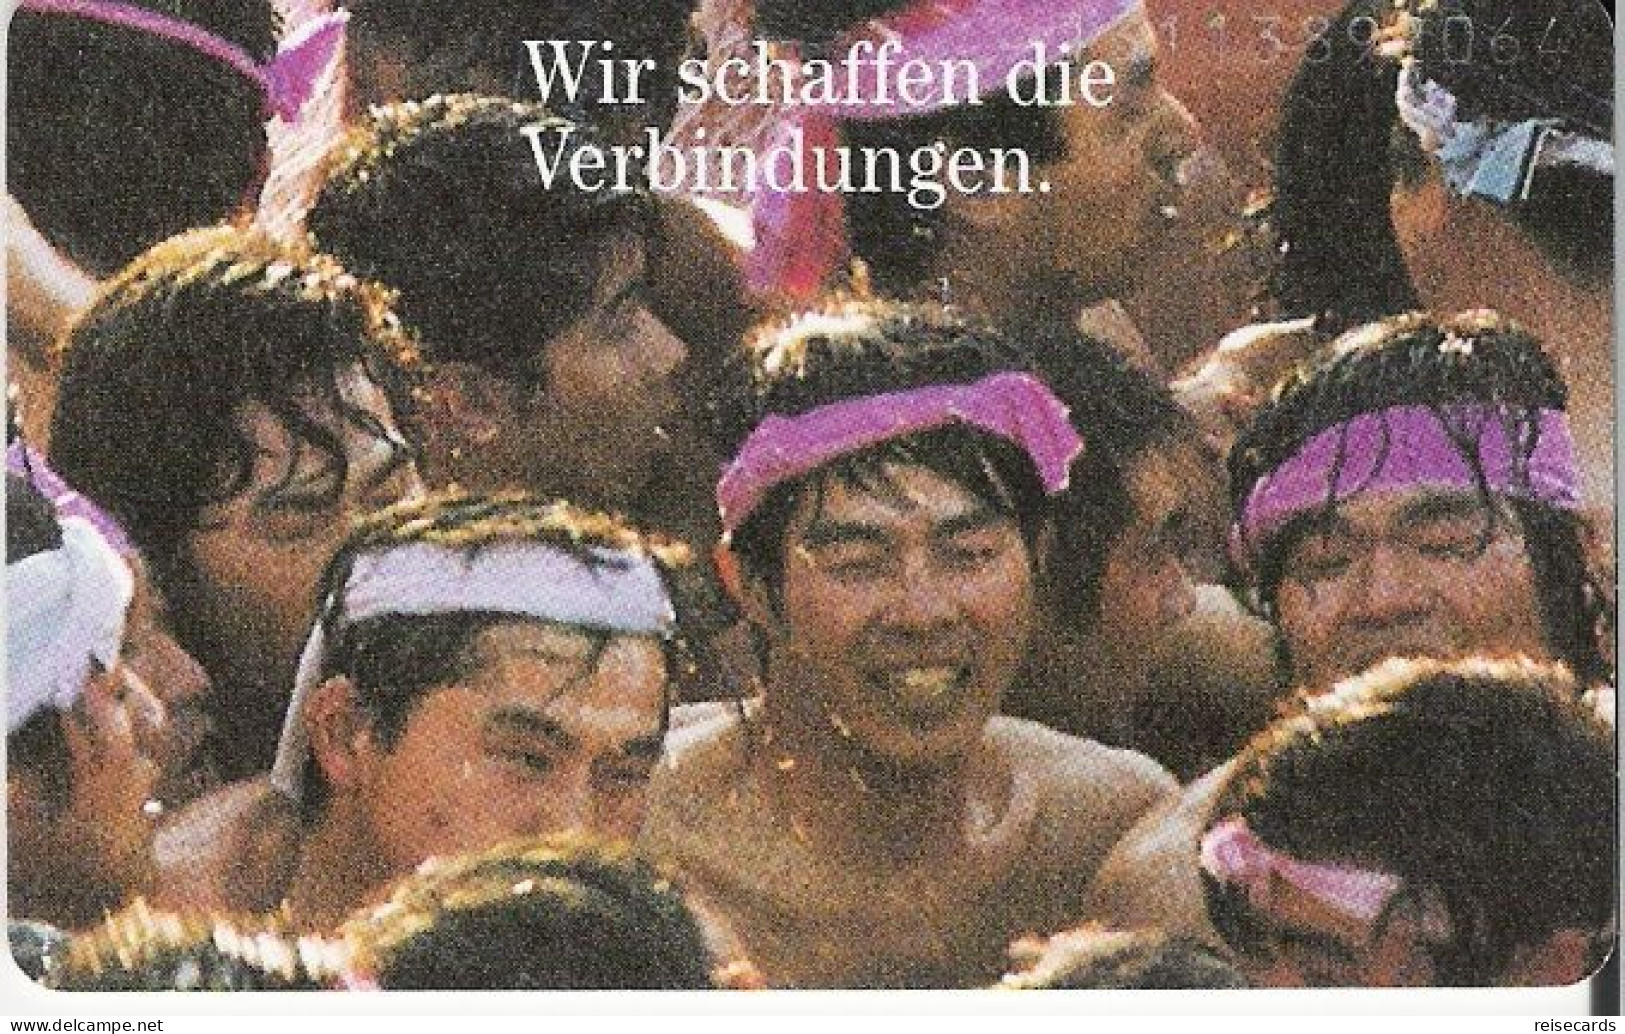 Germany: Telekom A 41 10.93 Weihnachtsedition 1993. Ichinomiya In Japan - A + AD-Serie : Pubblicitarie Della Telecom Tedesca AG